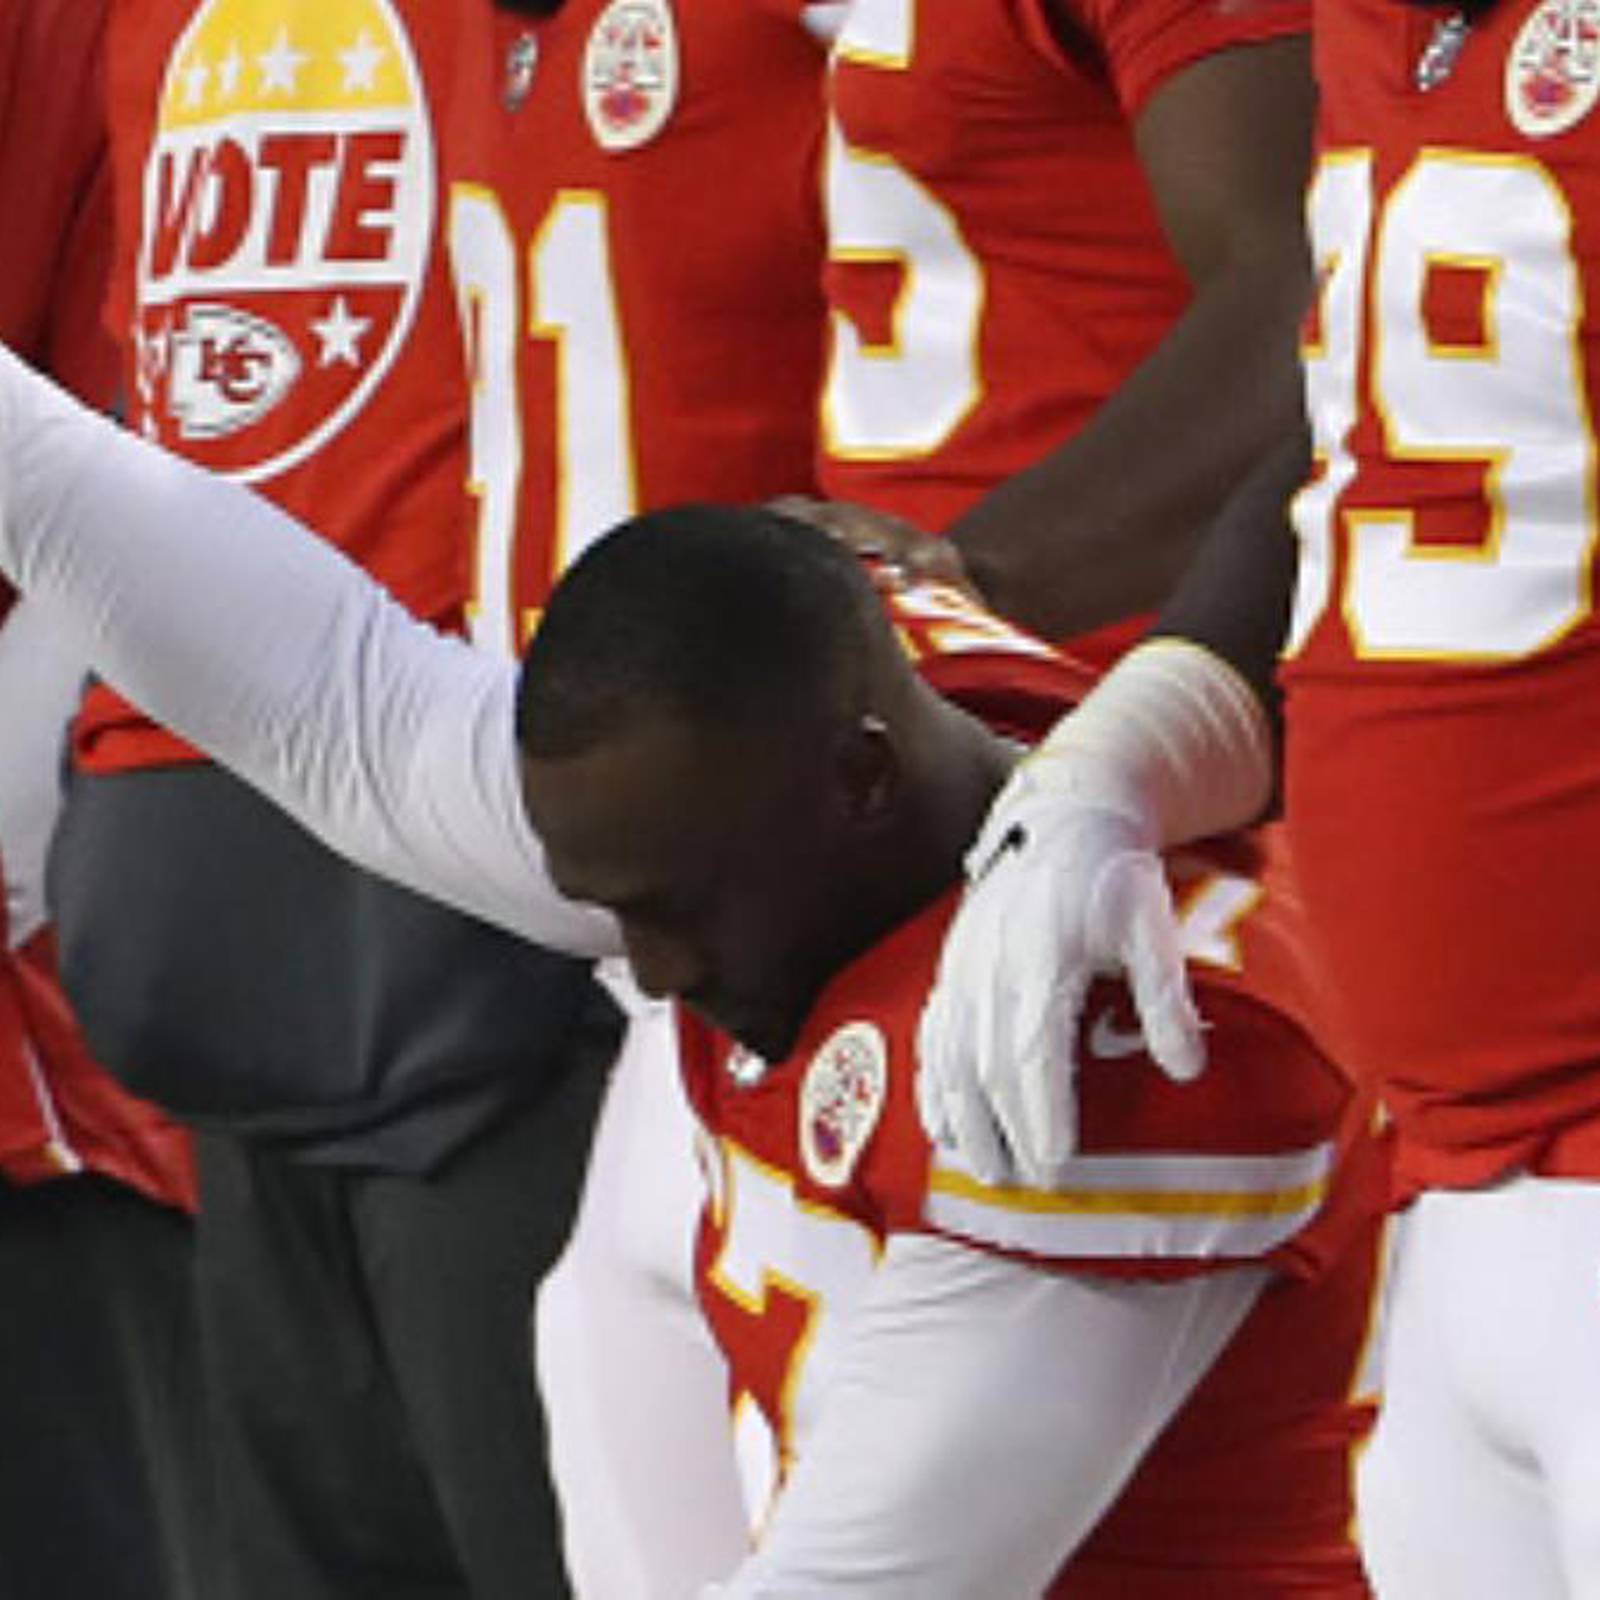 Kansas City Football Fans Booing During the Moment of Silence for Social  Justice Was an NFL Disgrace